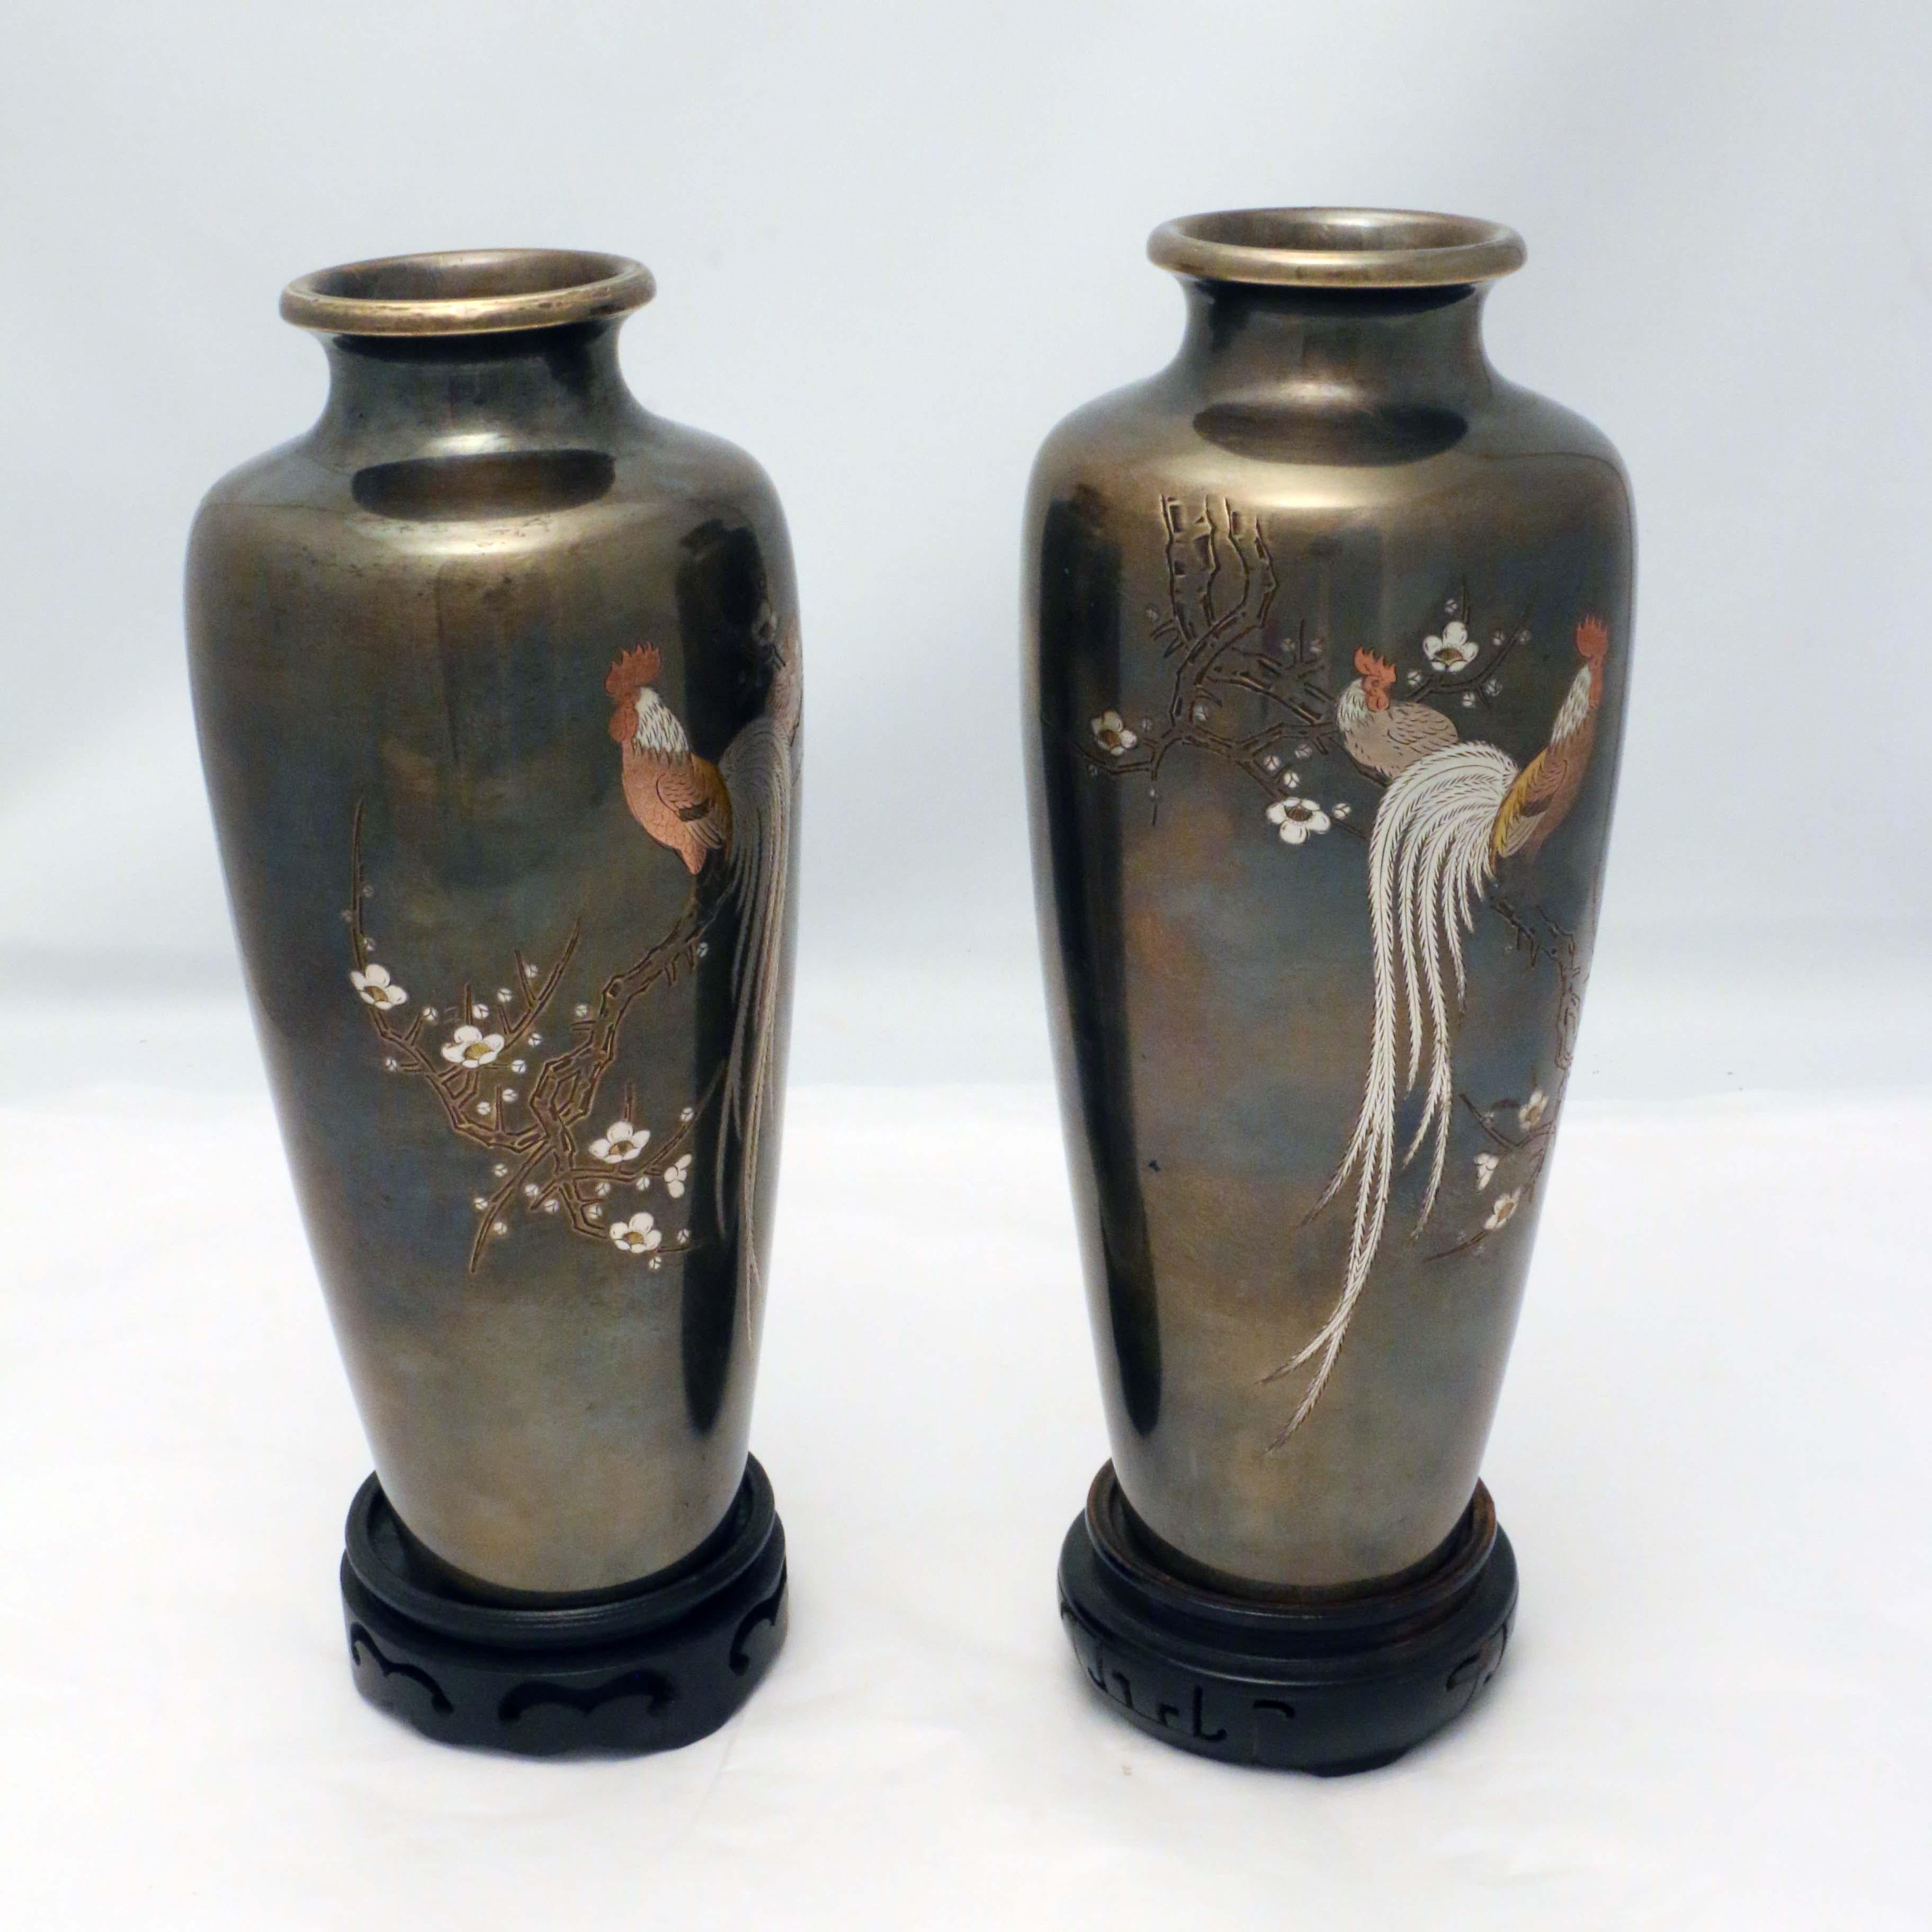 These slender vases are hand engraved with a cock roosting on a prunus branch, while the hen sits in the background. The decorator has given him a long feathery tail like a bird of paradise. The coxcomb and body are colored with a wash. They are a